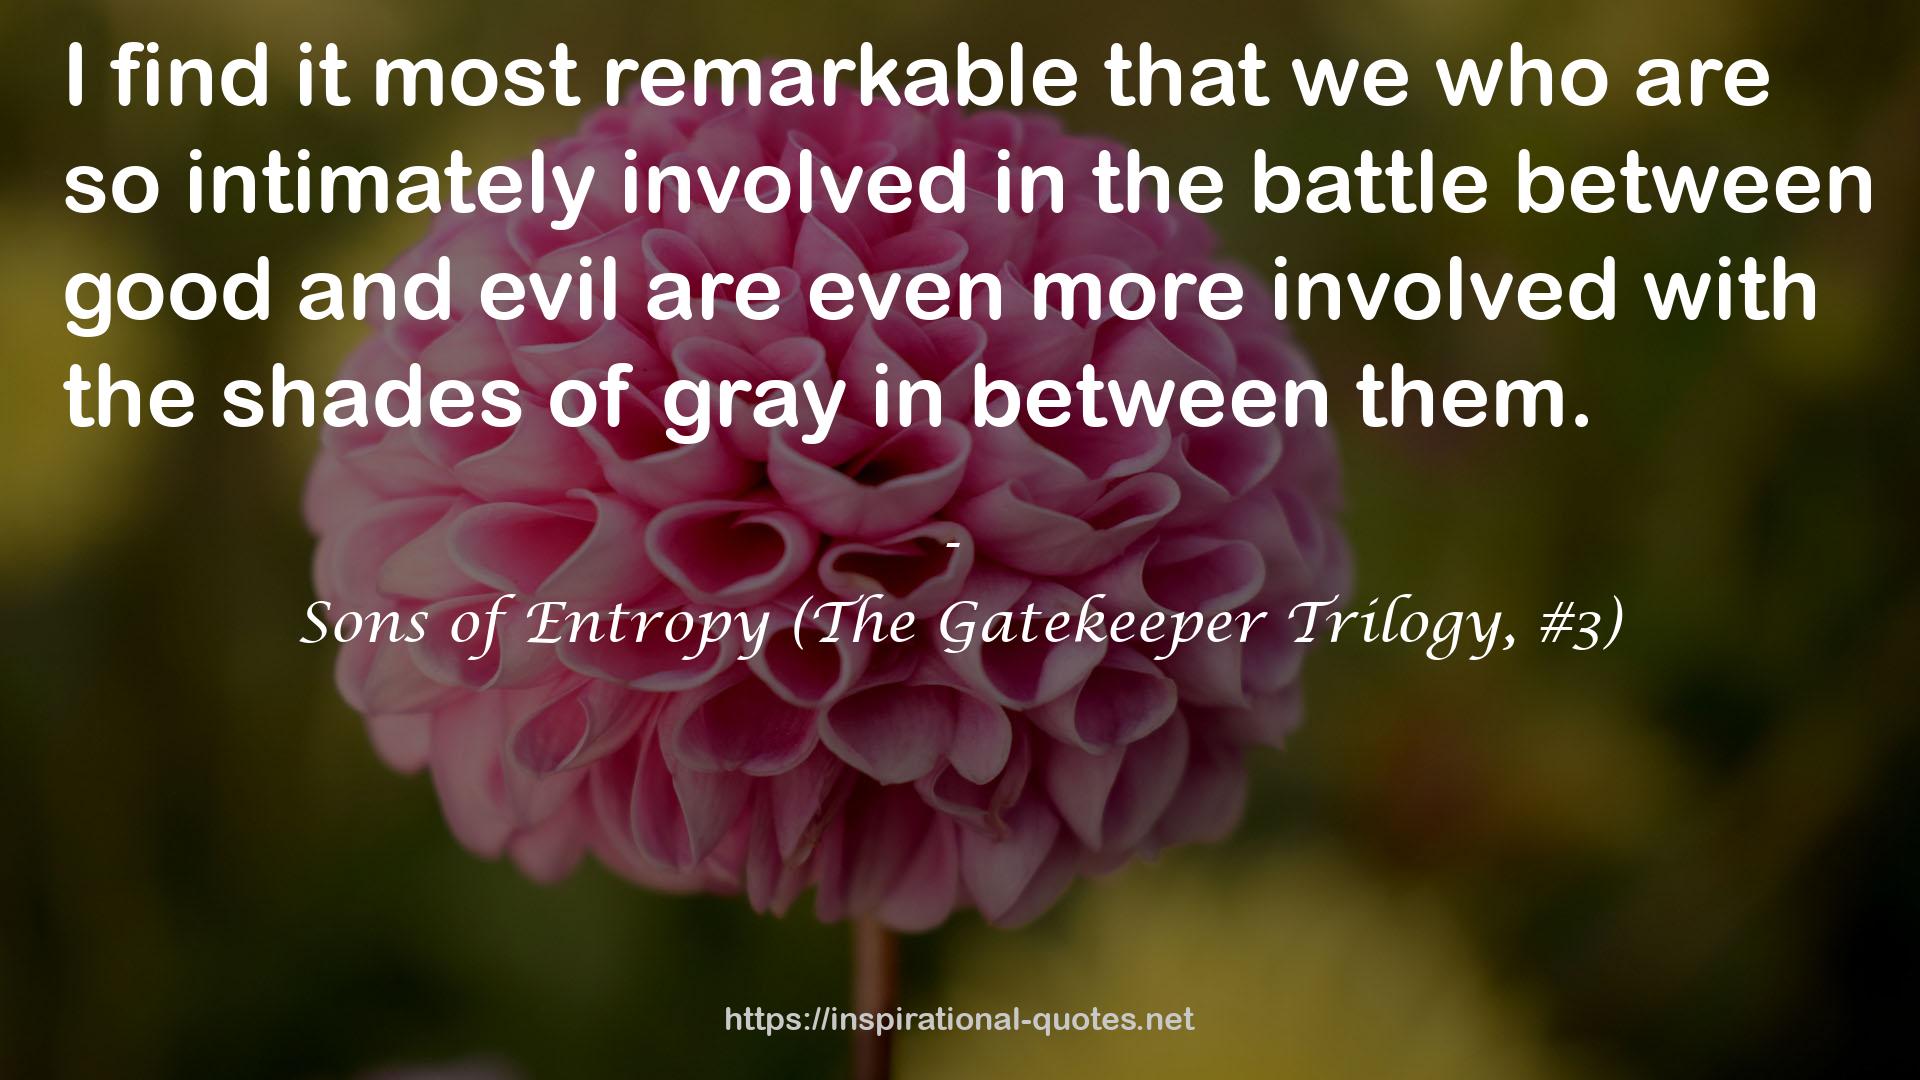 Sons of Entropy (The Gatekeeper Trilogy, #3) QUOTES